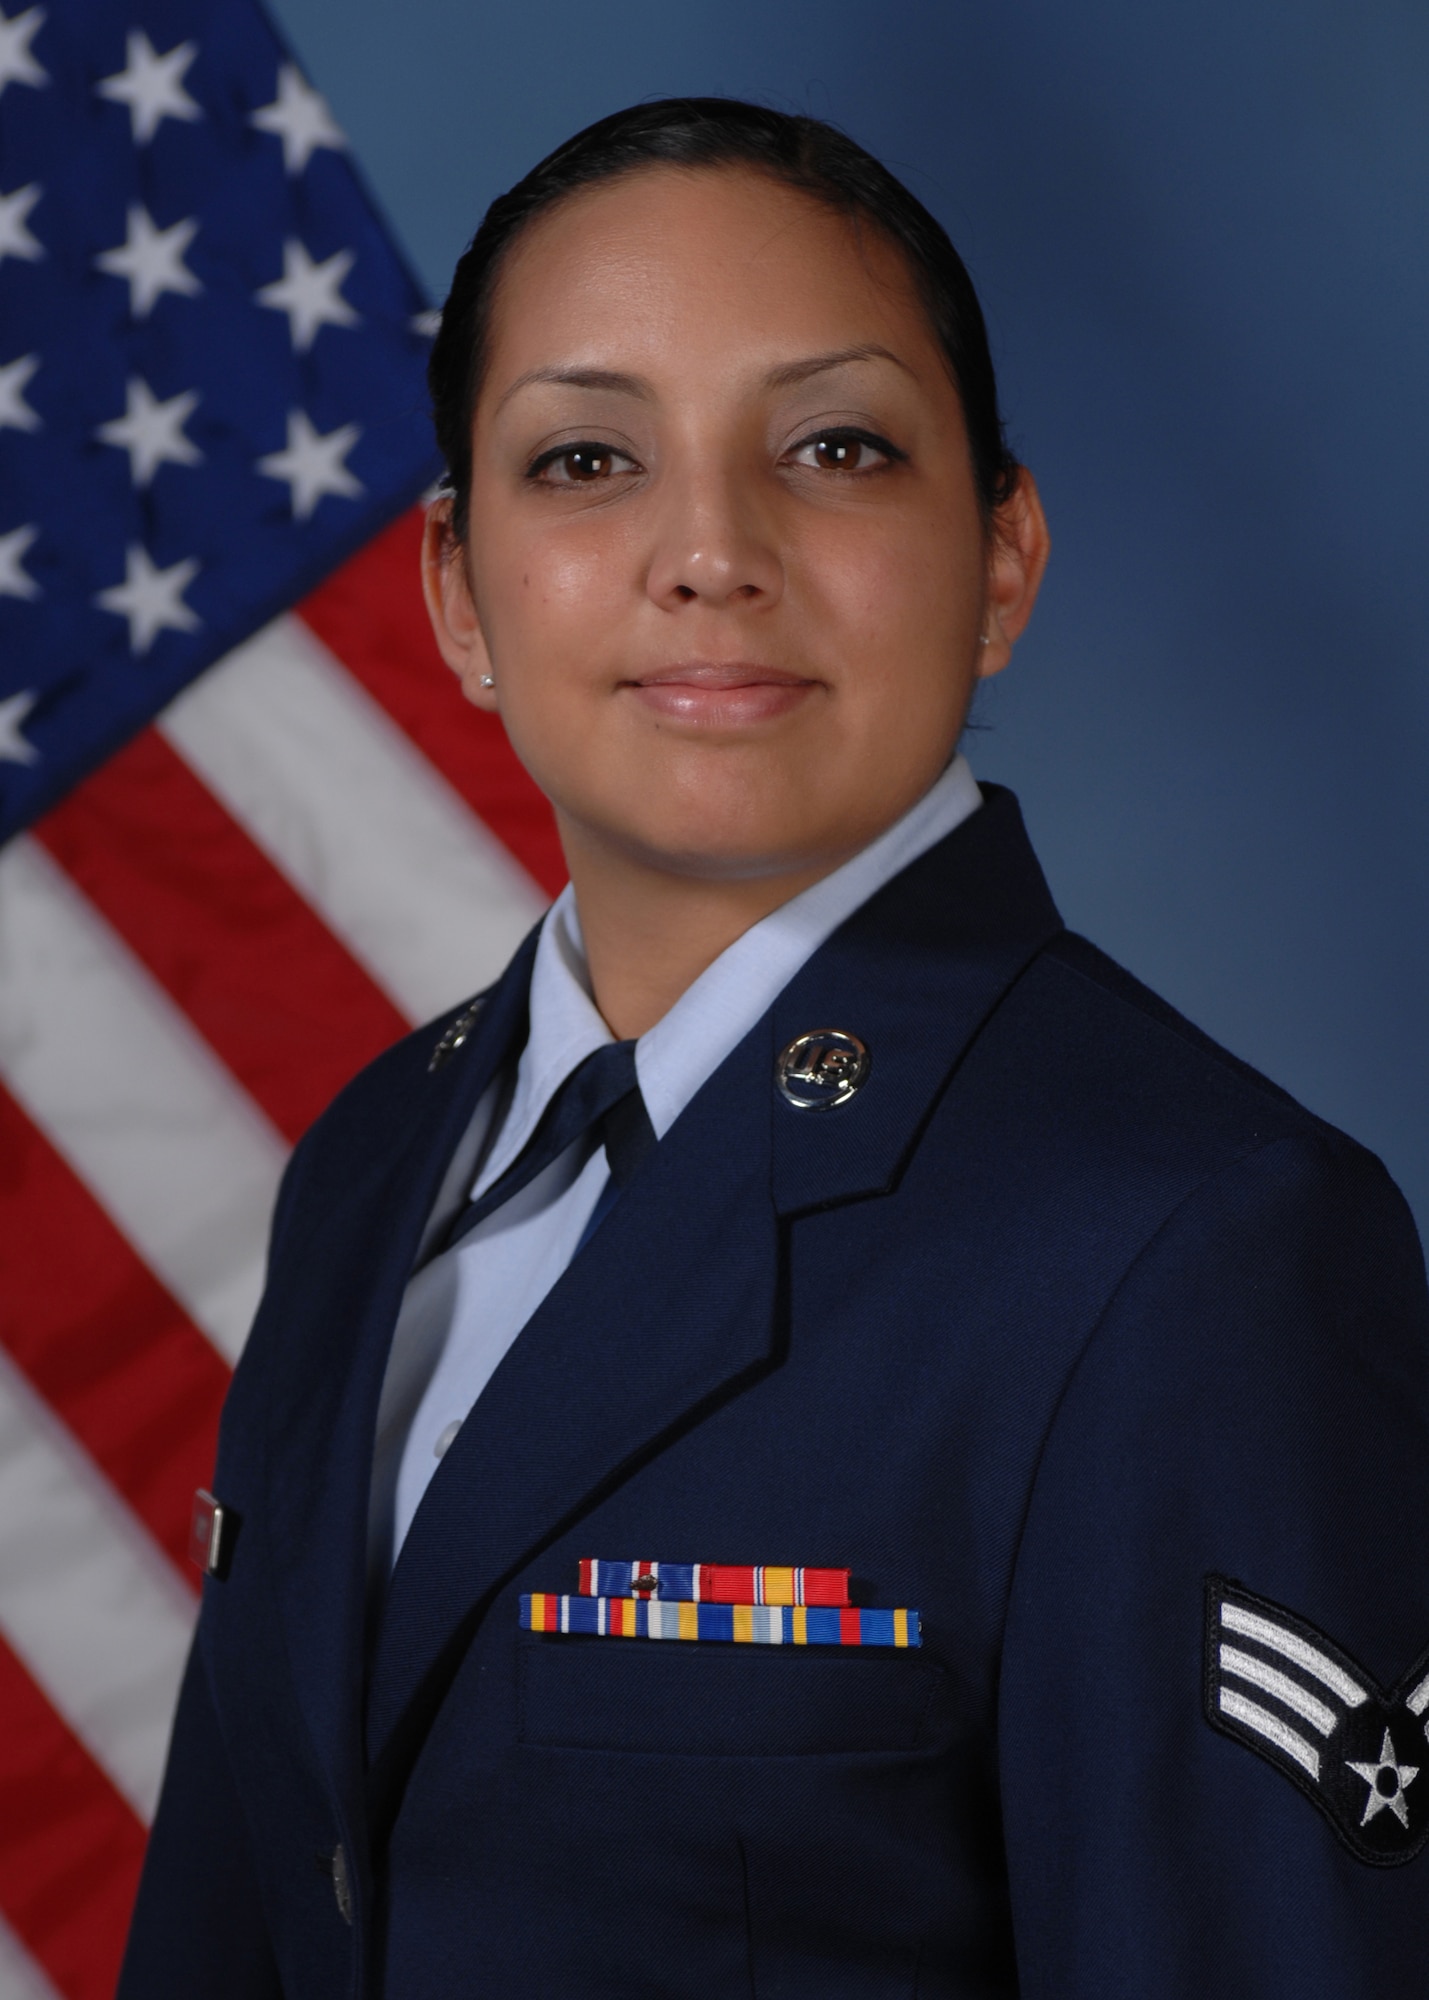 OFFUTT AIR FORCE BASE, Neb. -- Senior Airman Gidget B. Sanders, from Shaw AFB, S.C., is one of 29 Airmen nominated for awards who will attend the 2010 Air Combat Command Outstanding Airmen of the Year Awards Banquet in Omaha, Neb., April 21. Airman Sanders is nominated for the Airman of the Year Award. U.S. Air Force courtesy photo